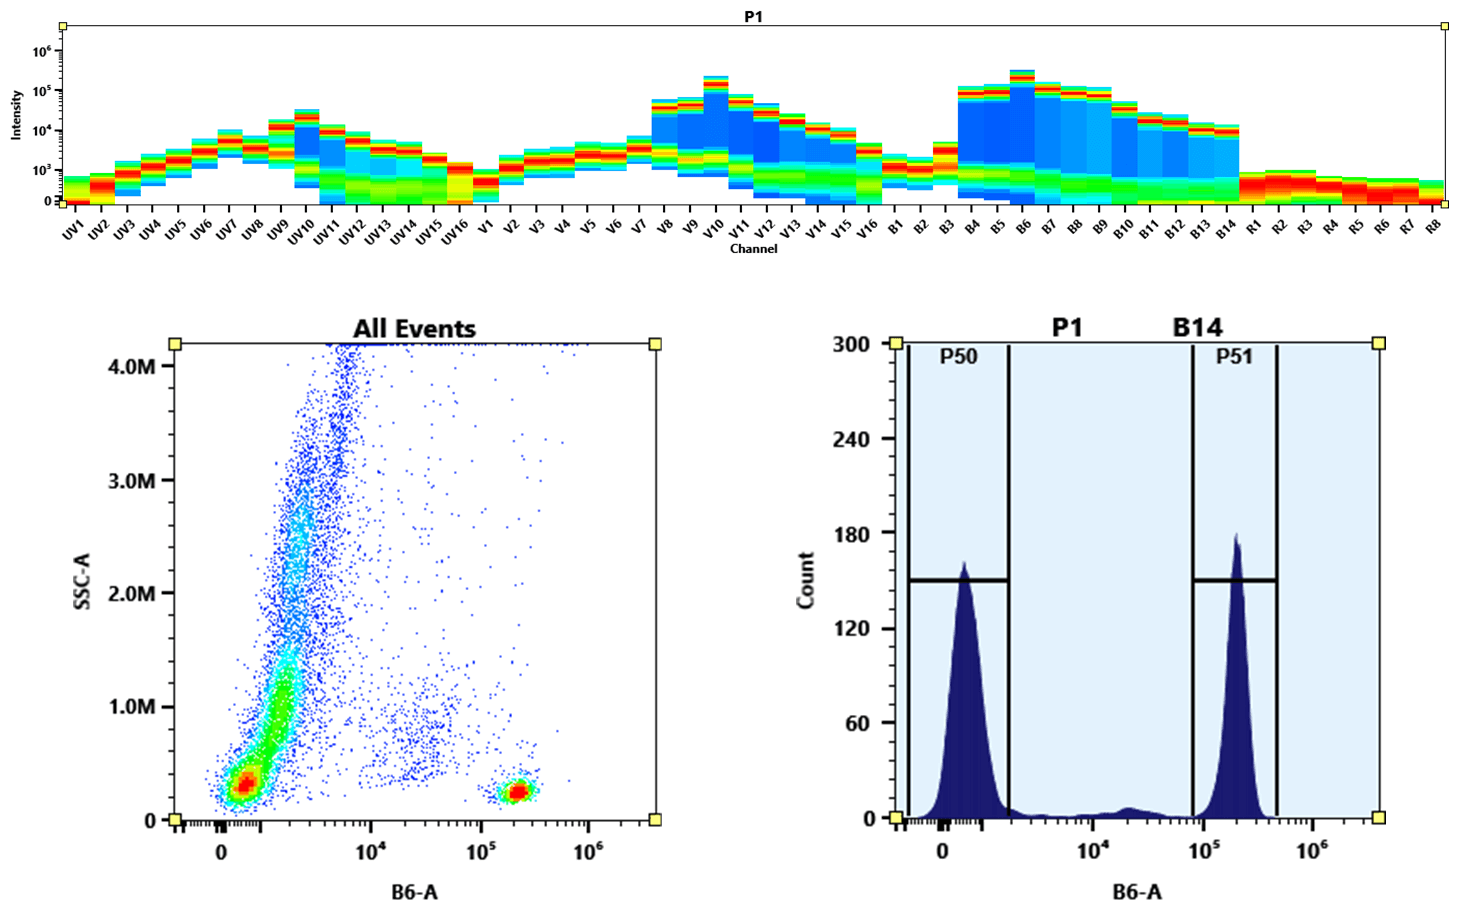 Flow cytometry analysis of whole blood cells stained with PE-iFluor® 597 anti-human CD4 *SK3* conjugate. The fluorescence signal was monitored using an Aurora flow cytometer in the PE-iFluor® 597 specific B6-A channel.